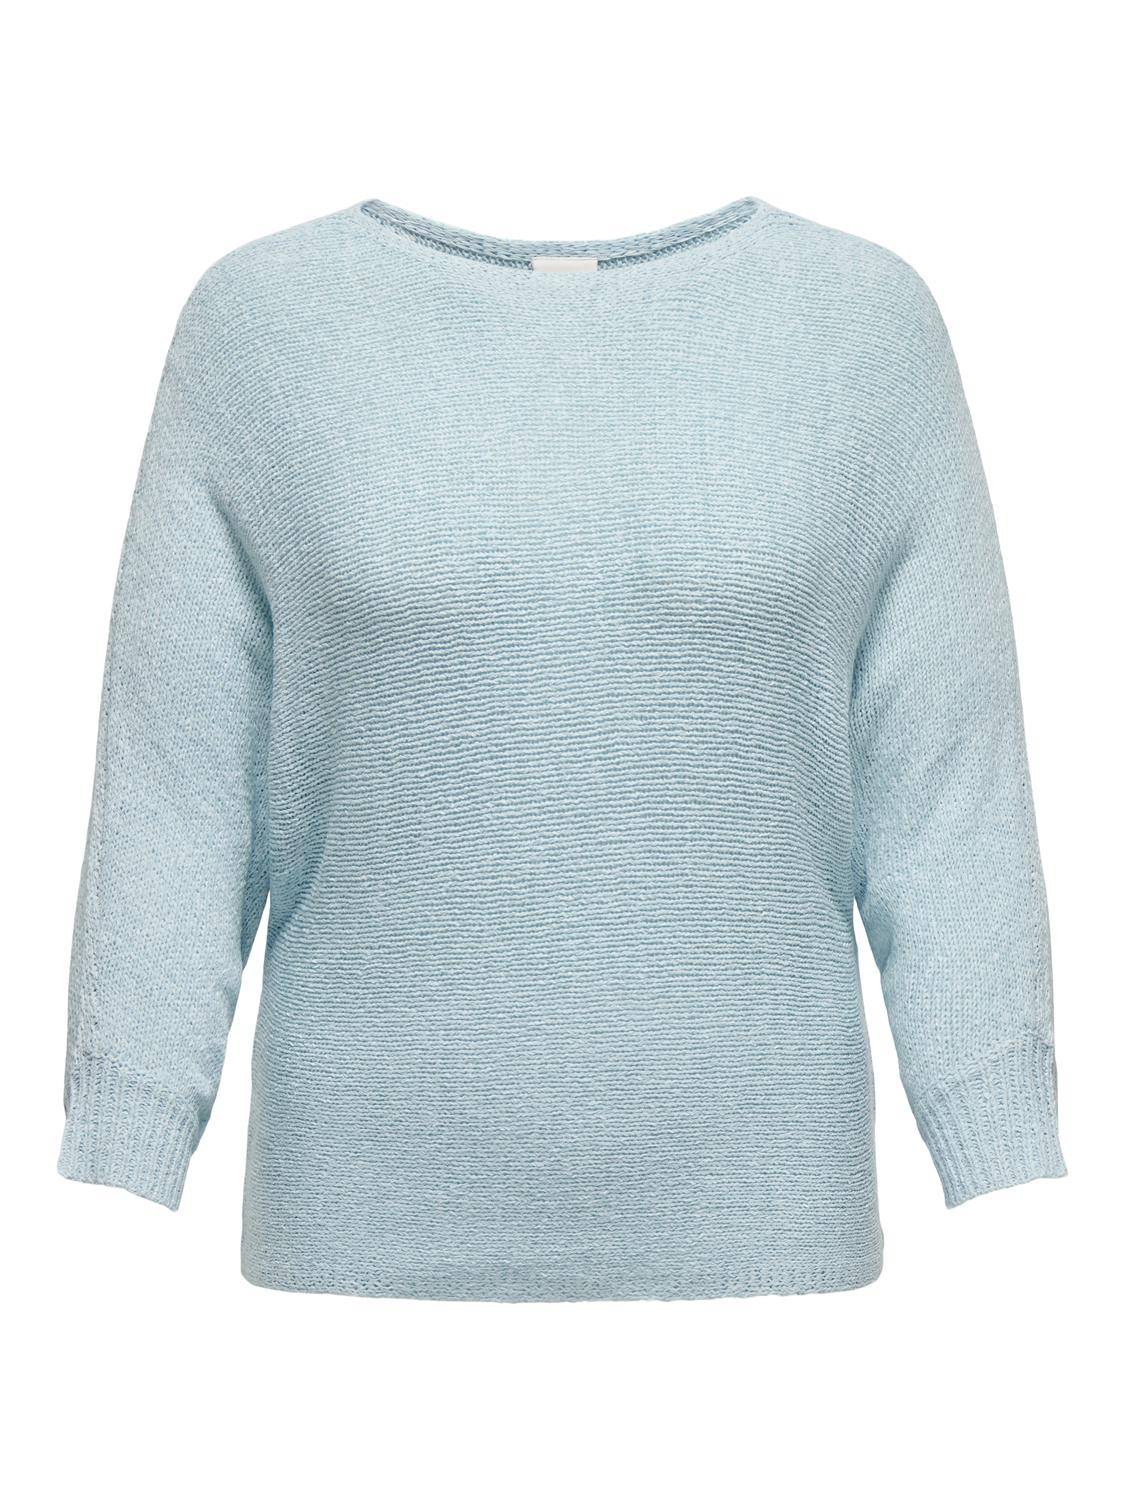 Only Carmakoma Geena Pullover in Blue